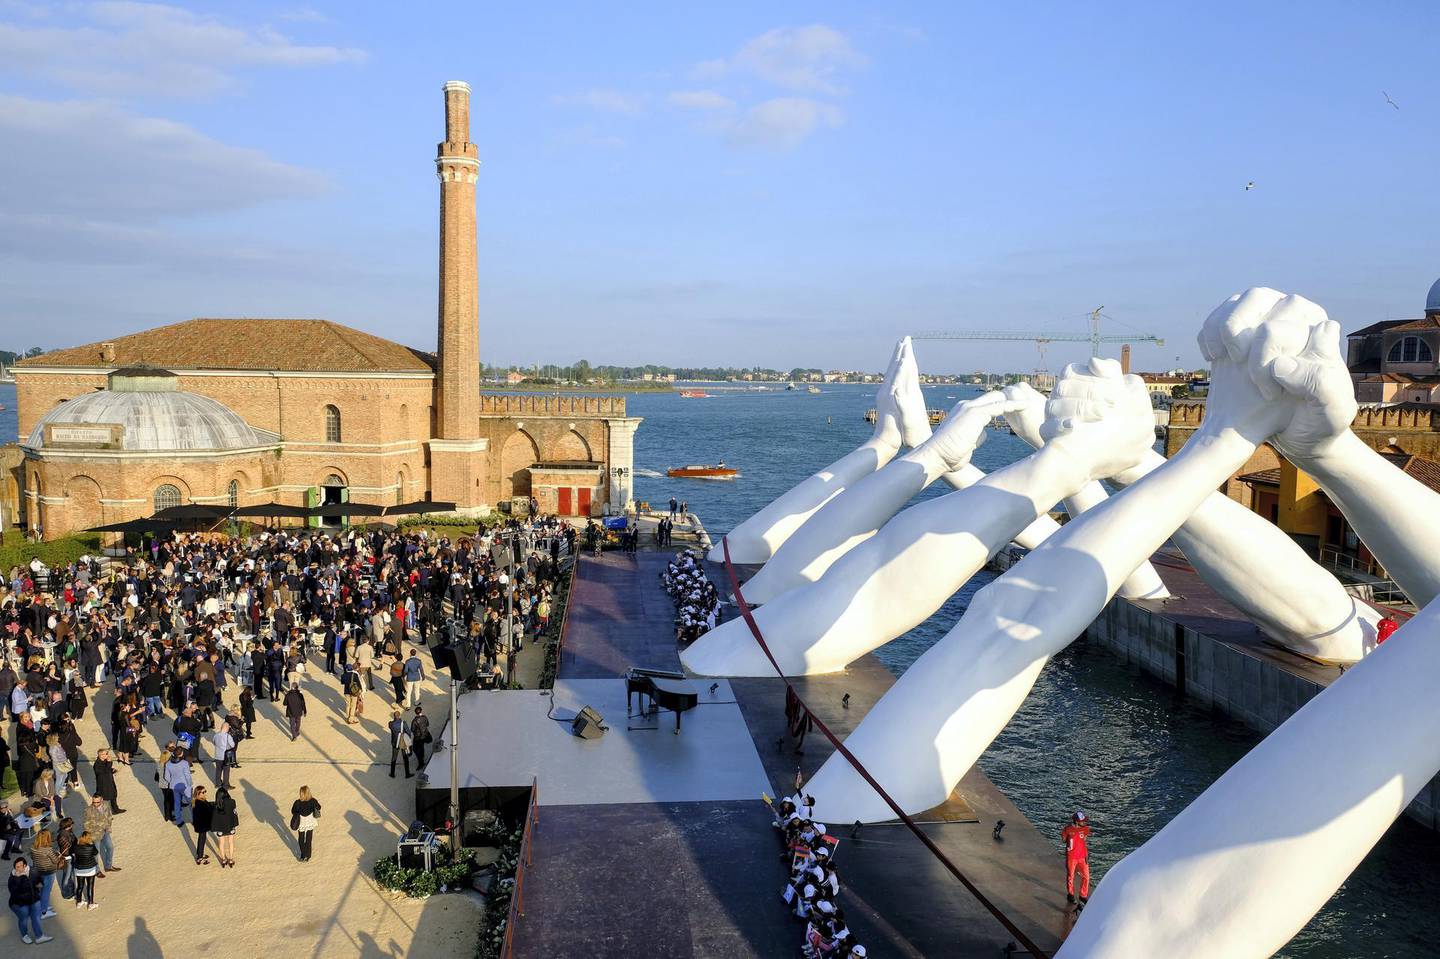 VENICE, ITALY - MAY 09: Lorenzo Quinn‚Äôs Building Bridges by Halcyon Gallery during Venice Biennale 2019 on May 09, 2019 in Venice, Italy. (Photo by David M. Benett/Dave Benett/Getty Images for Halcyon Art International)